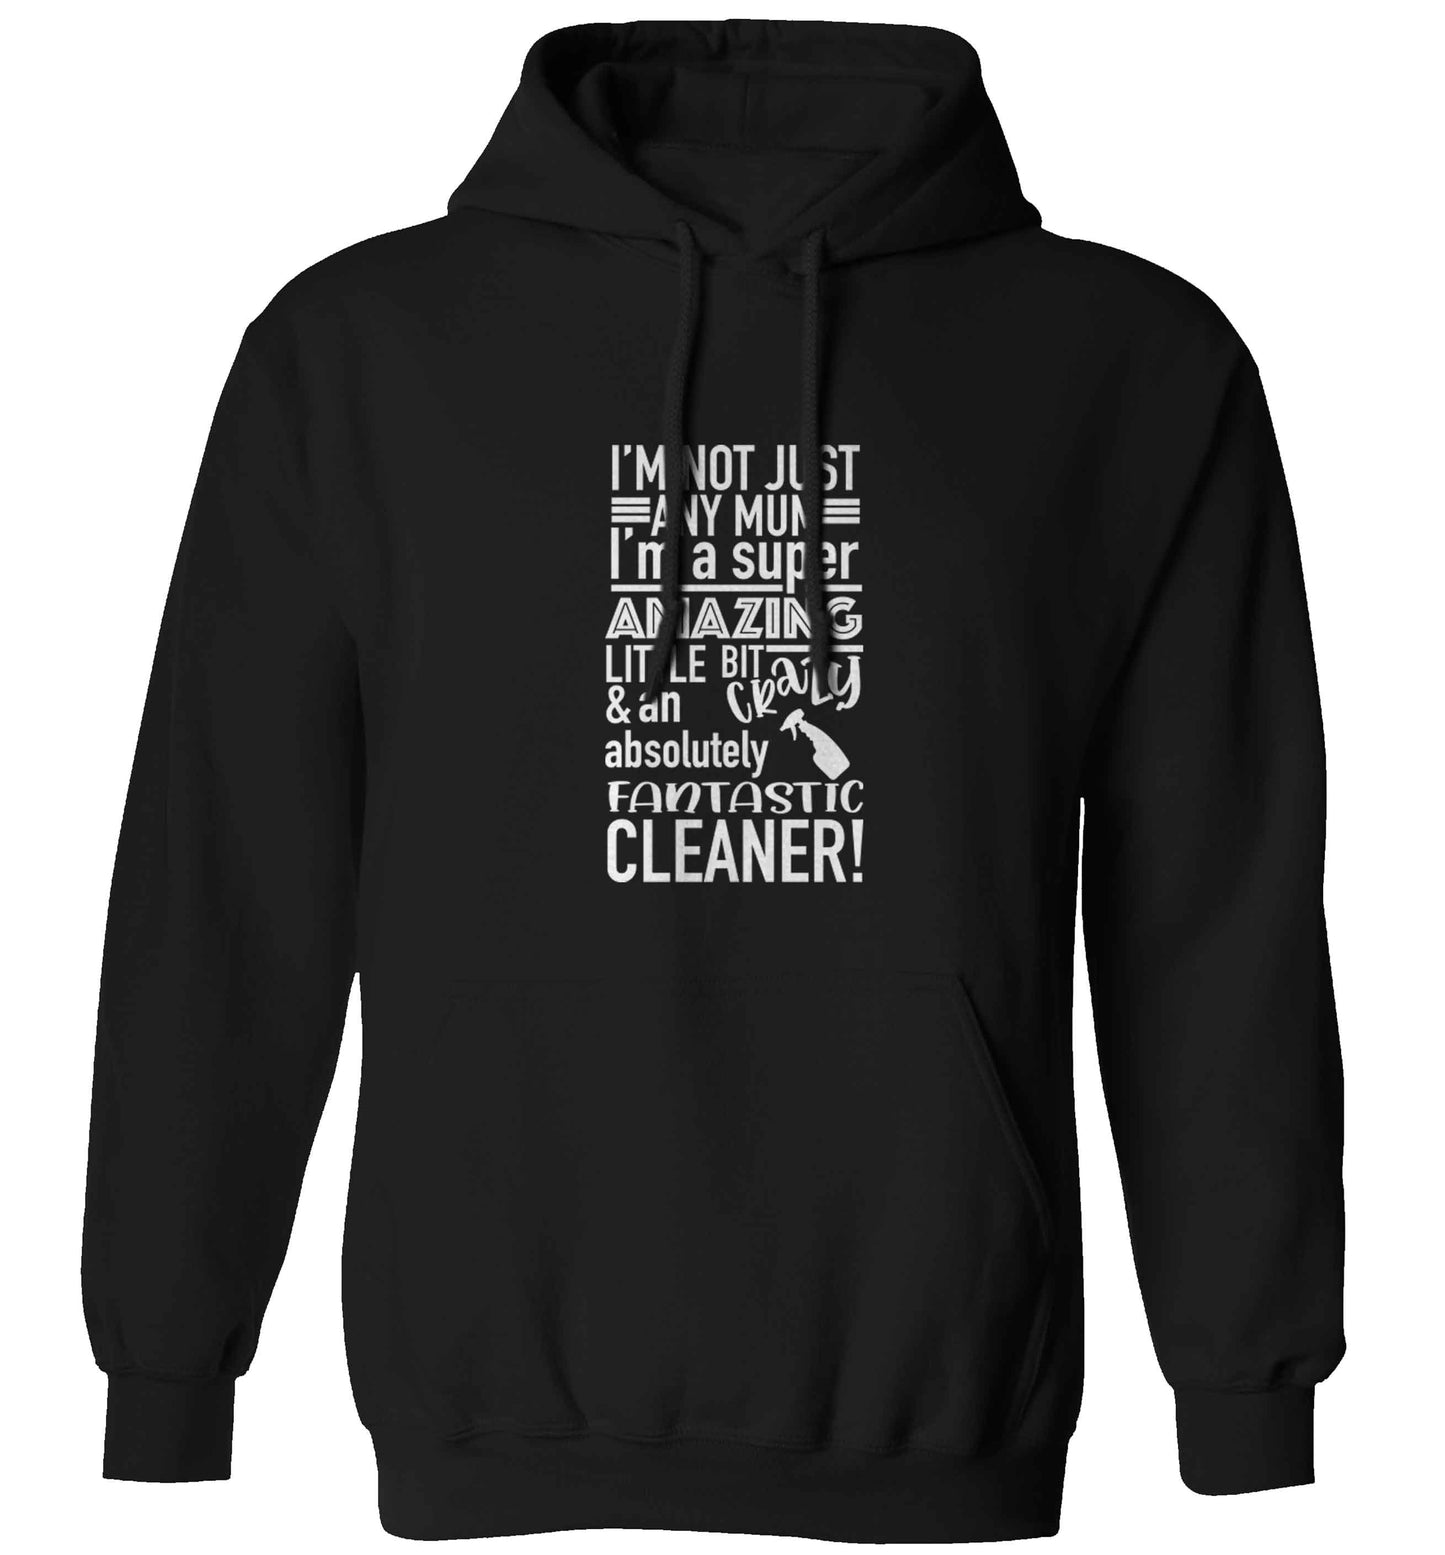 I'm not just any mum I'm a super amazing little bit crazy and an absolutely fantastic cleaner! adults unisex black hoodie 2XL